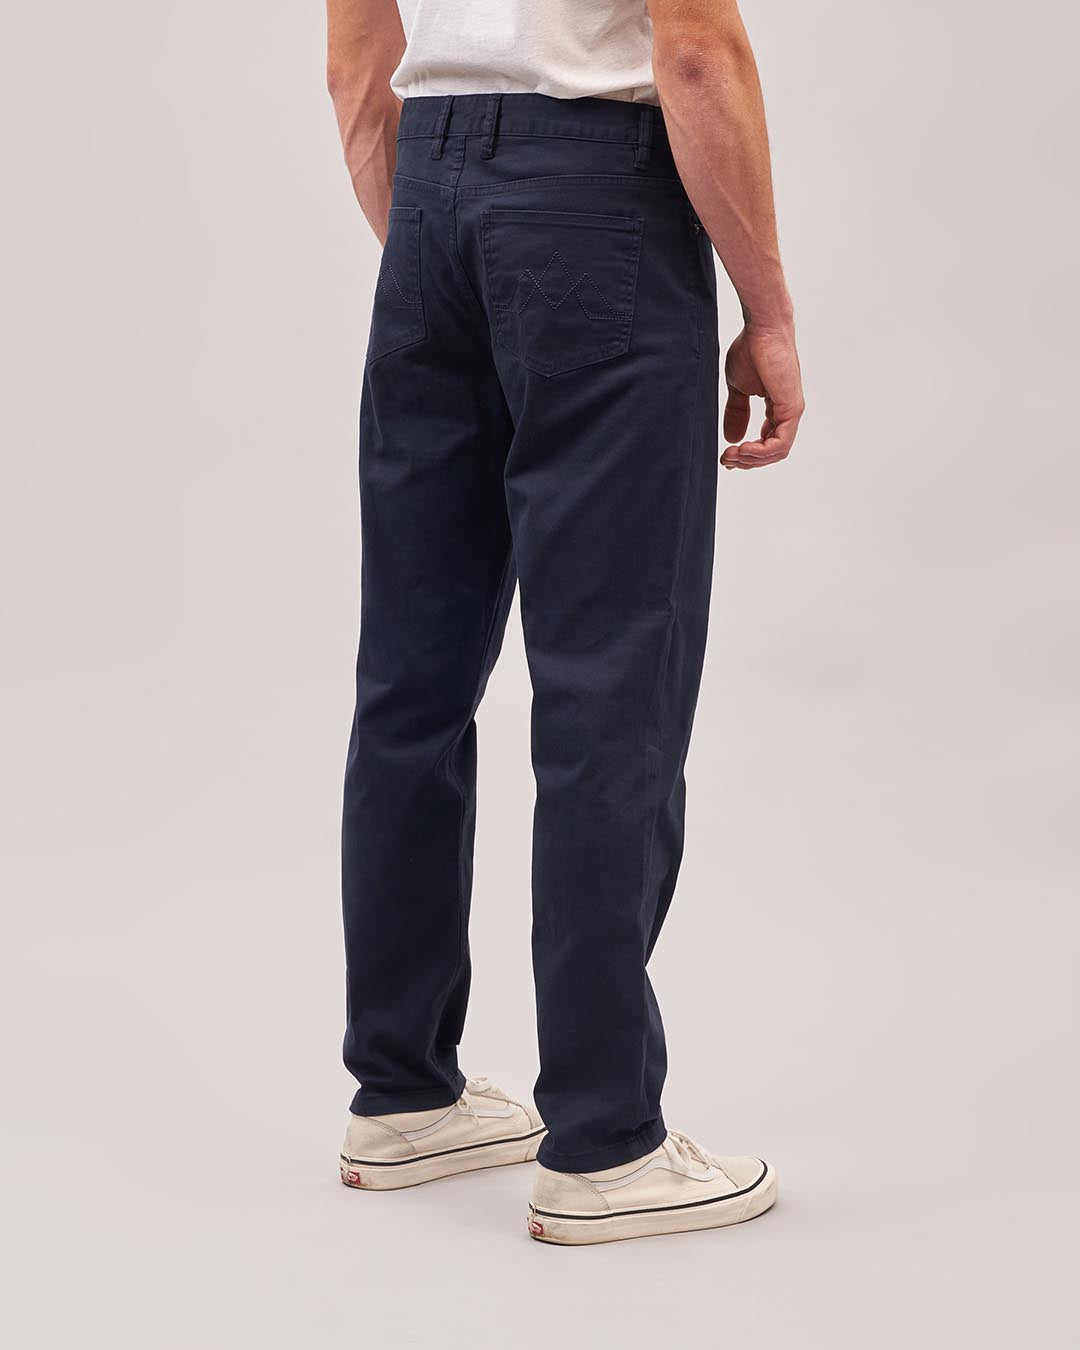 Levi's 511 slim fit bedford 5 pocket trousers in navy | ASOS